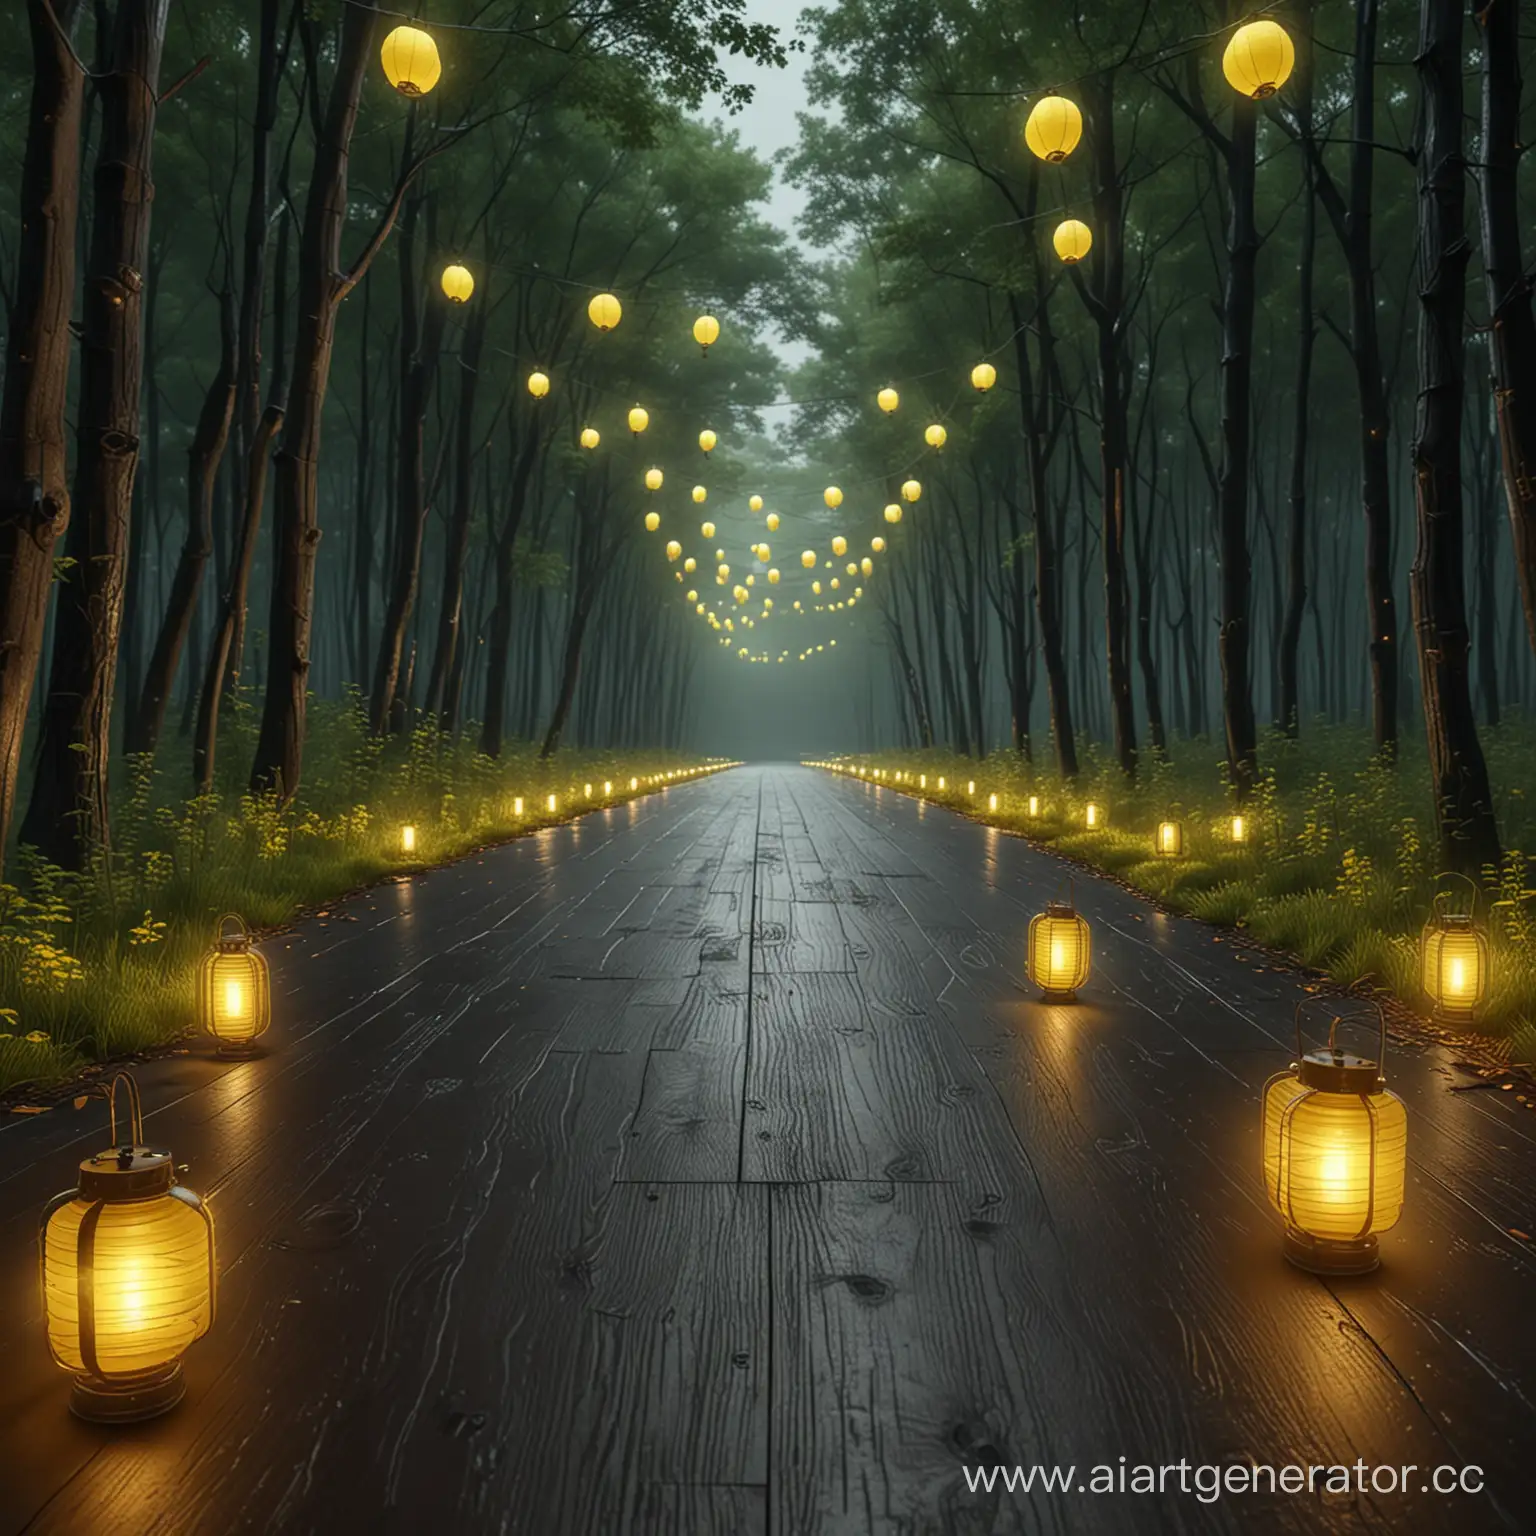 Green-Laminated-Plywood-Path-Illuminated-by-Yellow-Lanterns-in-Dark-Forest